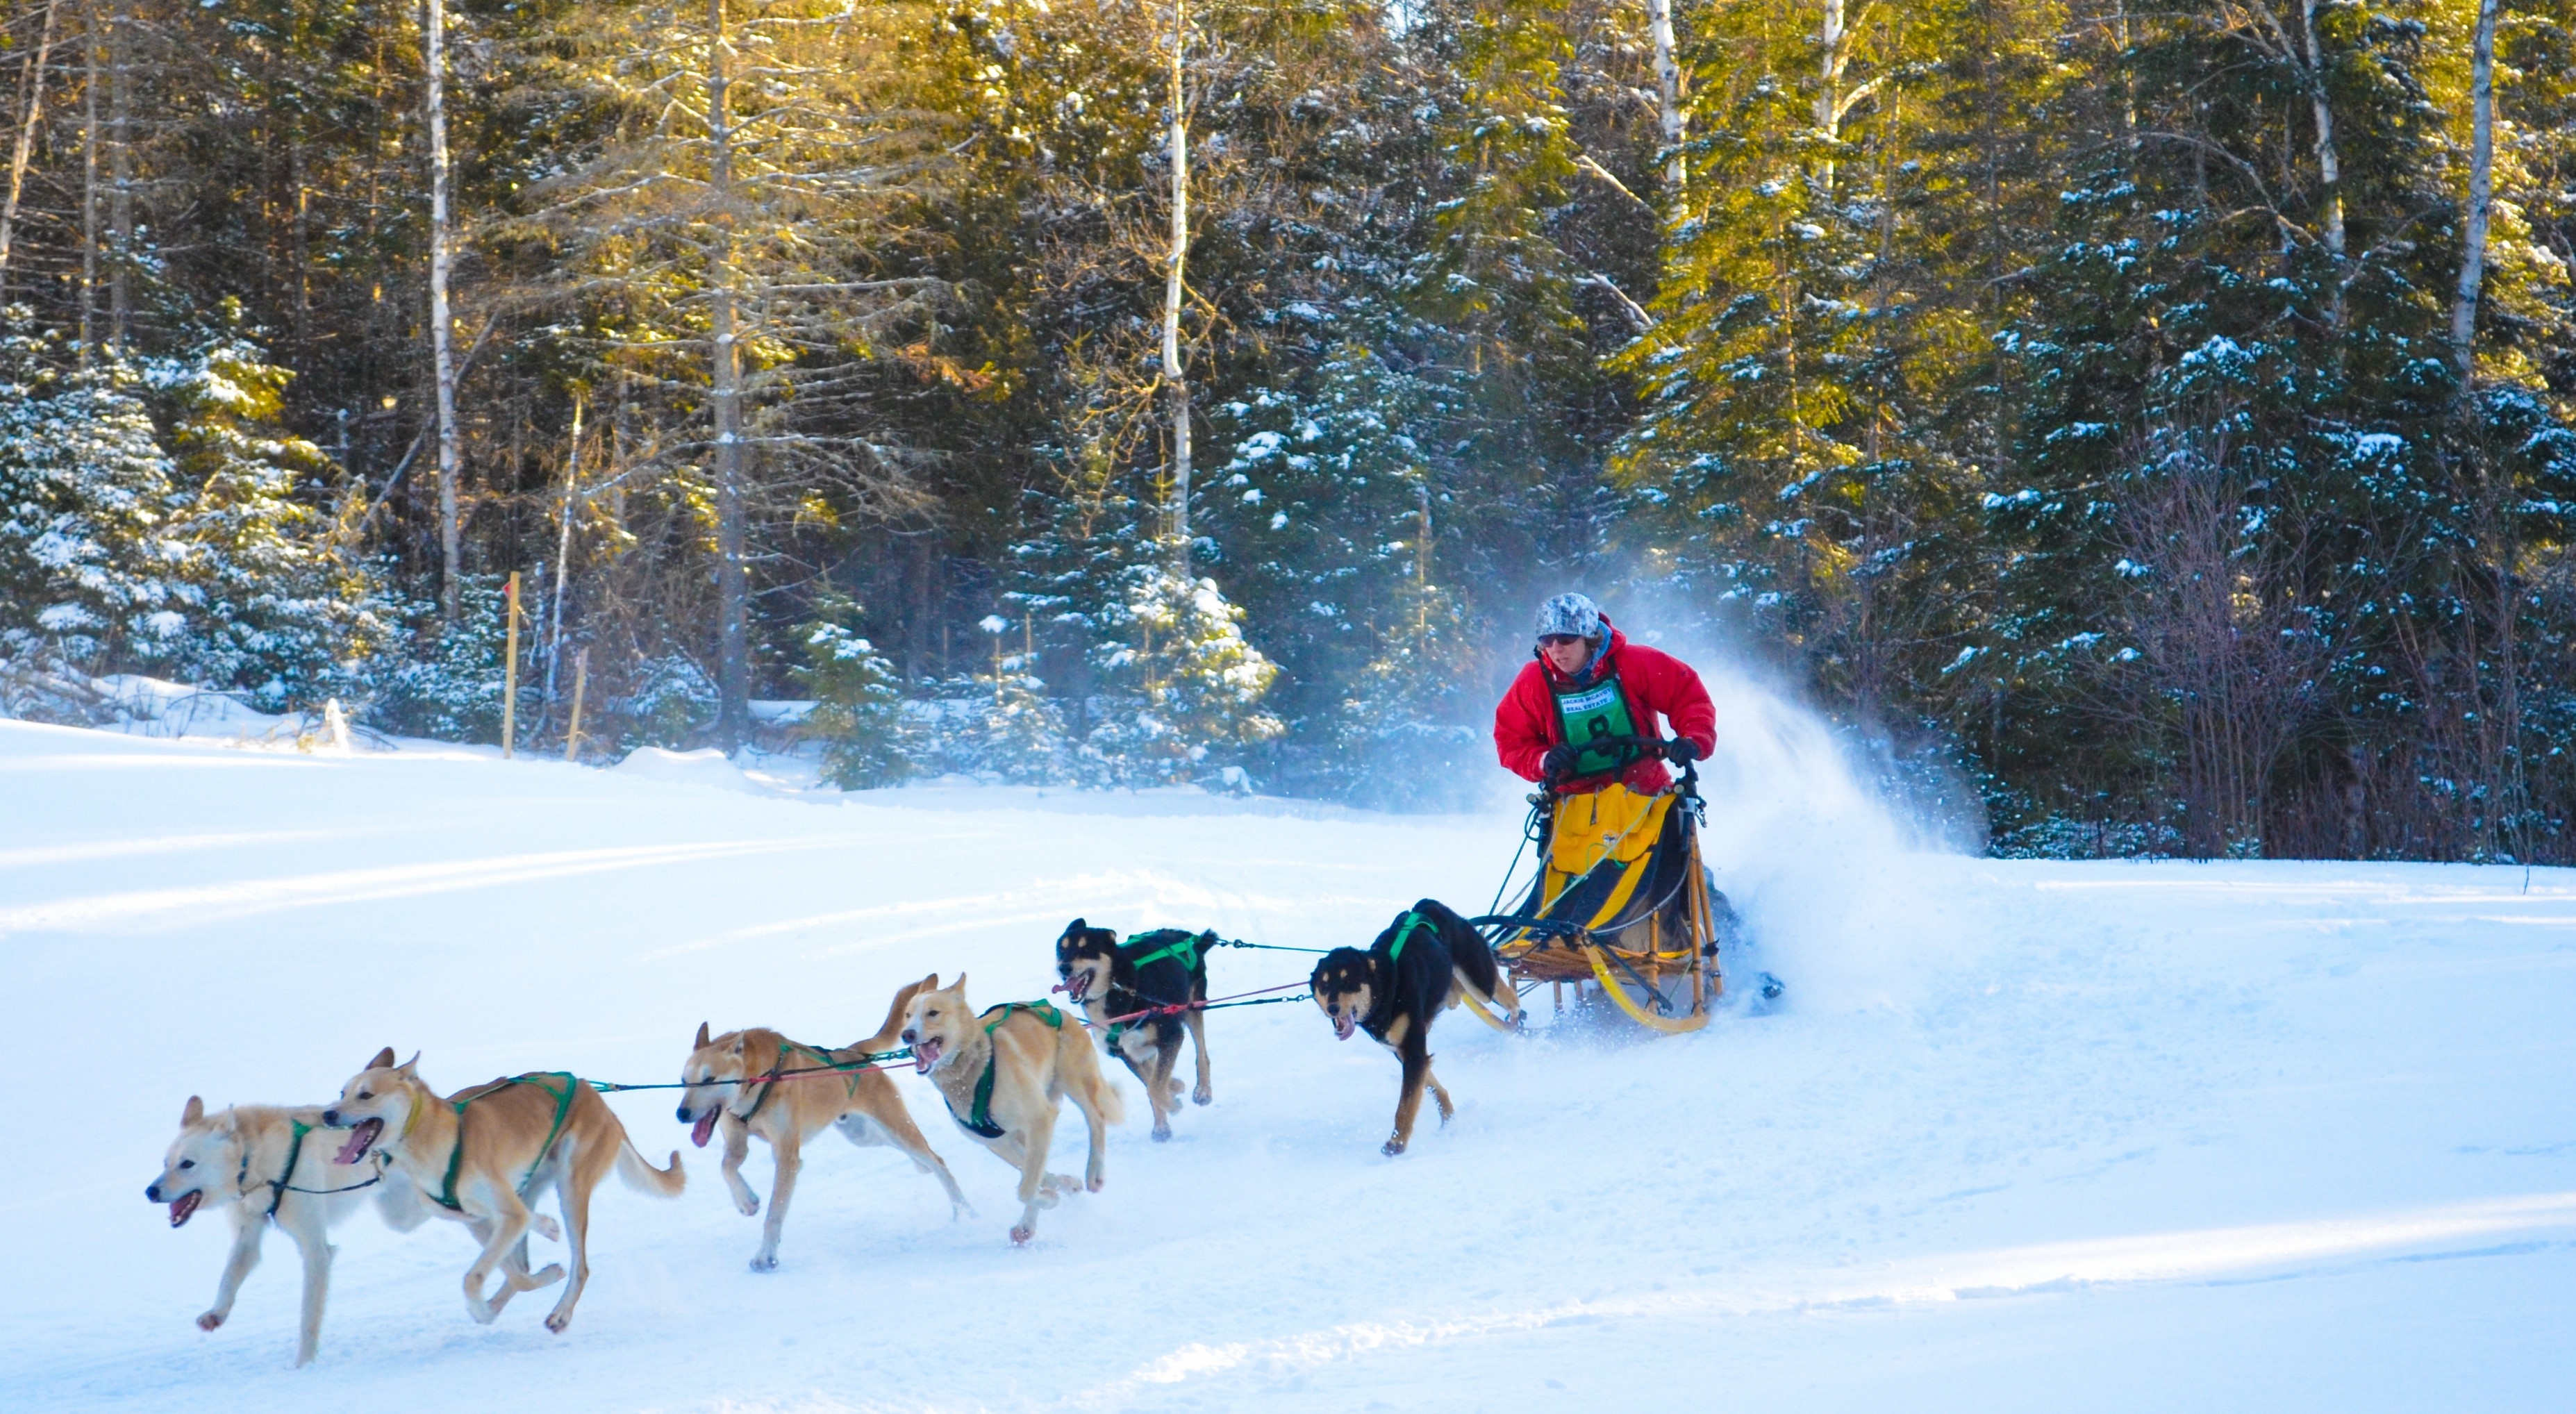 Dogsledding race through a field surrounded by a forest